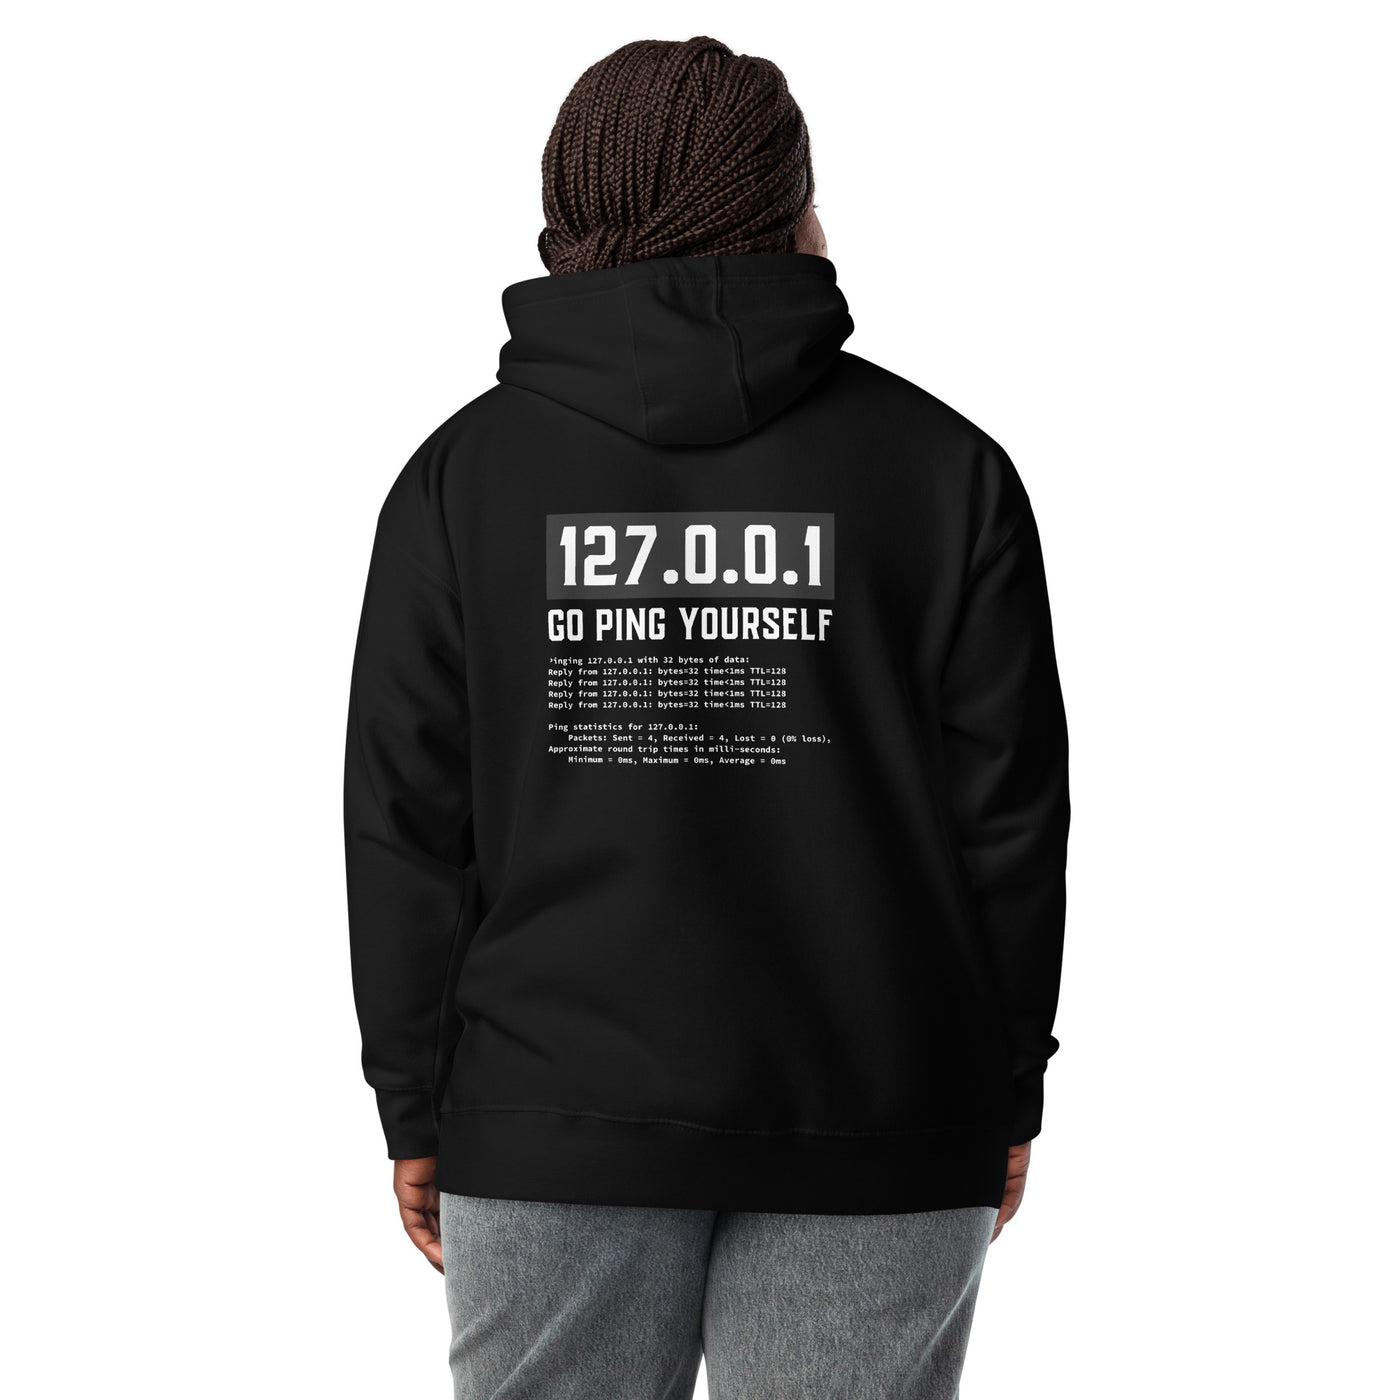 Go ping yourself - Unisex Hoodie ( Back Print )